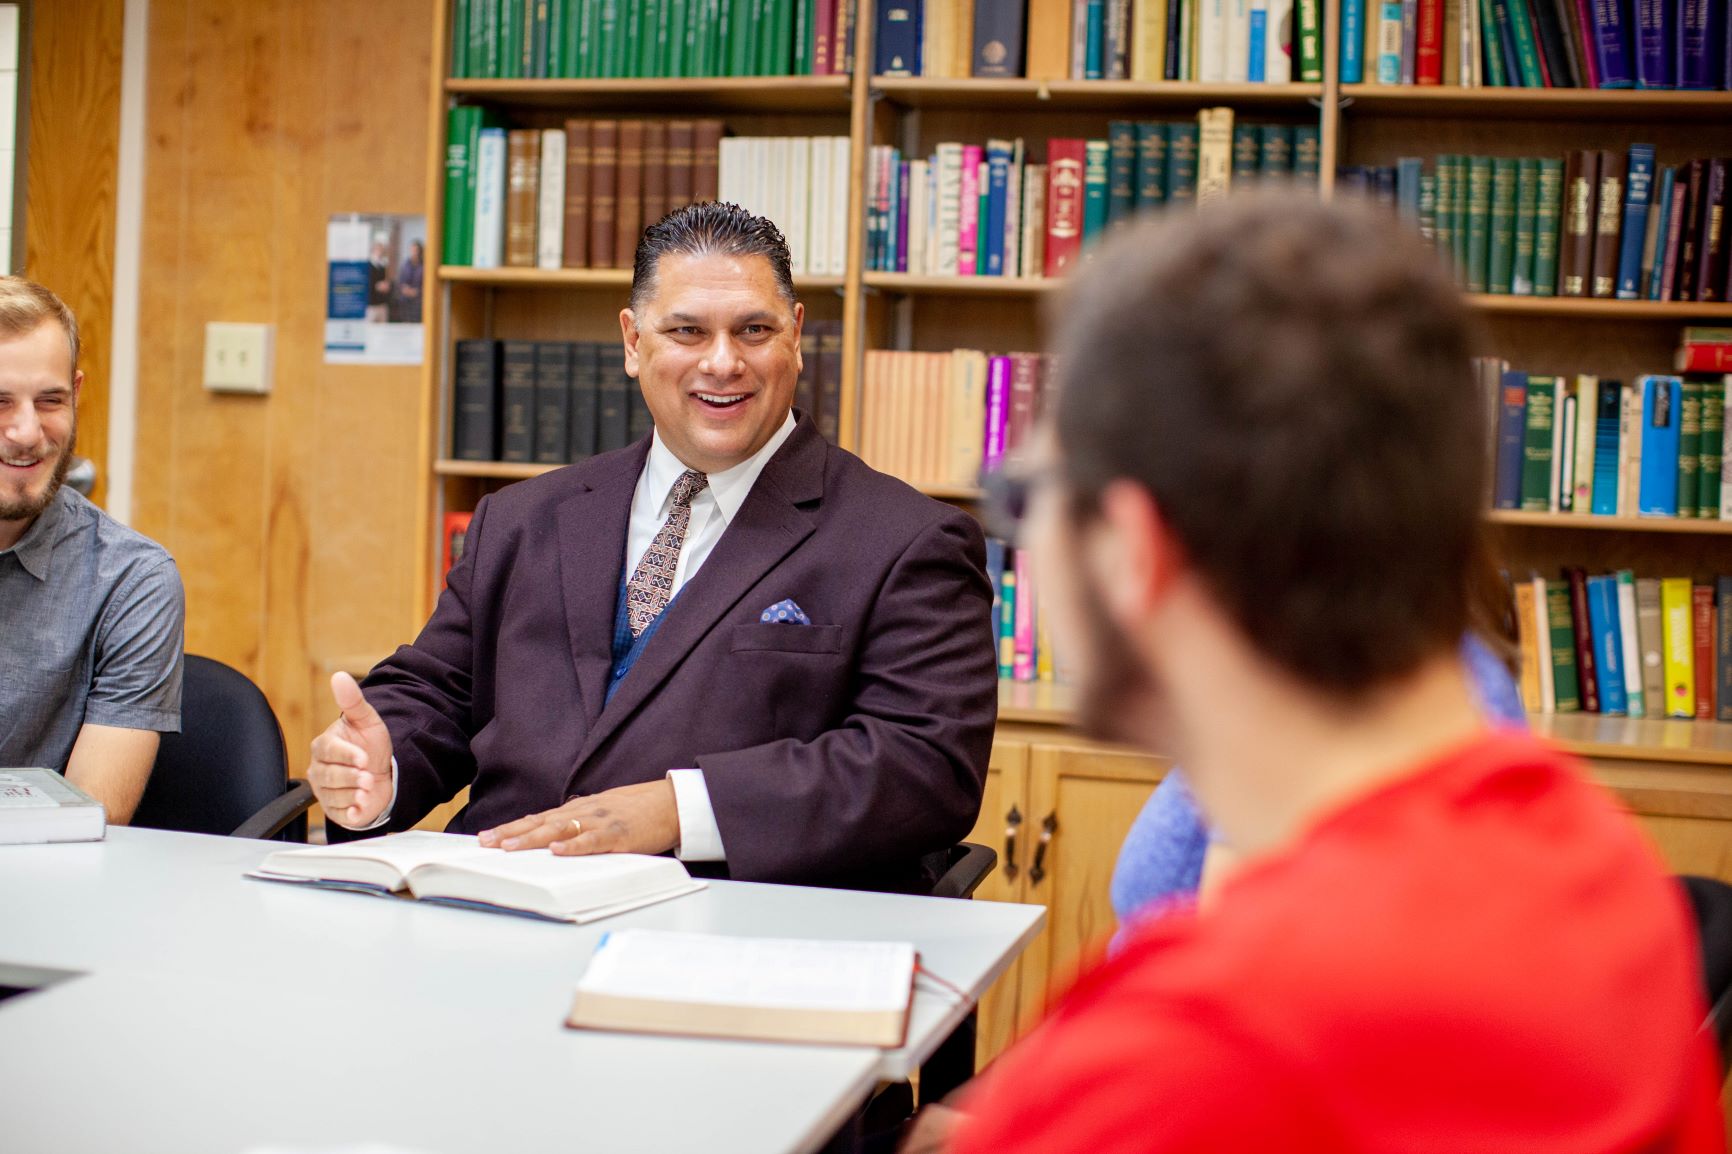 How Dr. Cardoza’s Heritage Led Him to a Midwestern Seminary, one of the seminaries in Indiana. Learn about Grace Theological Seminary.